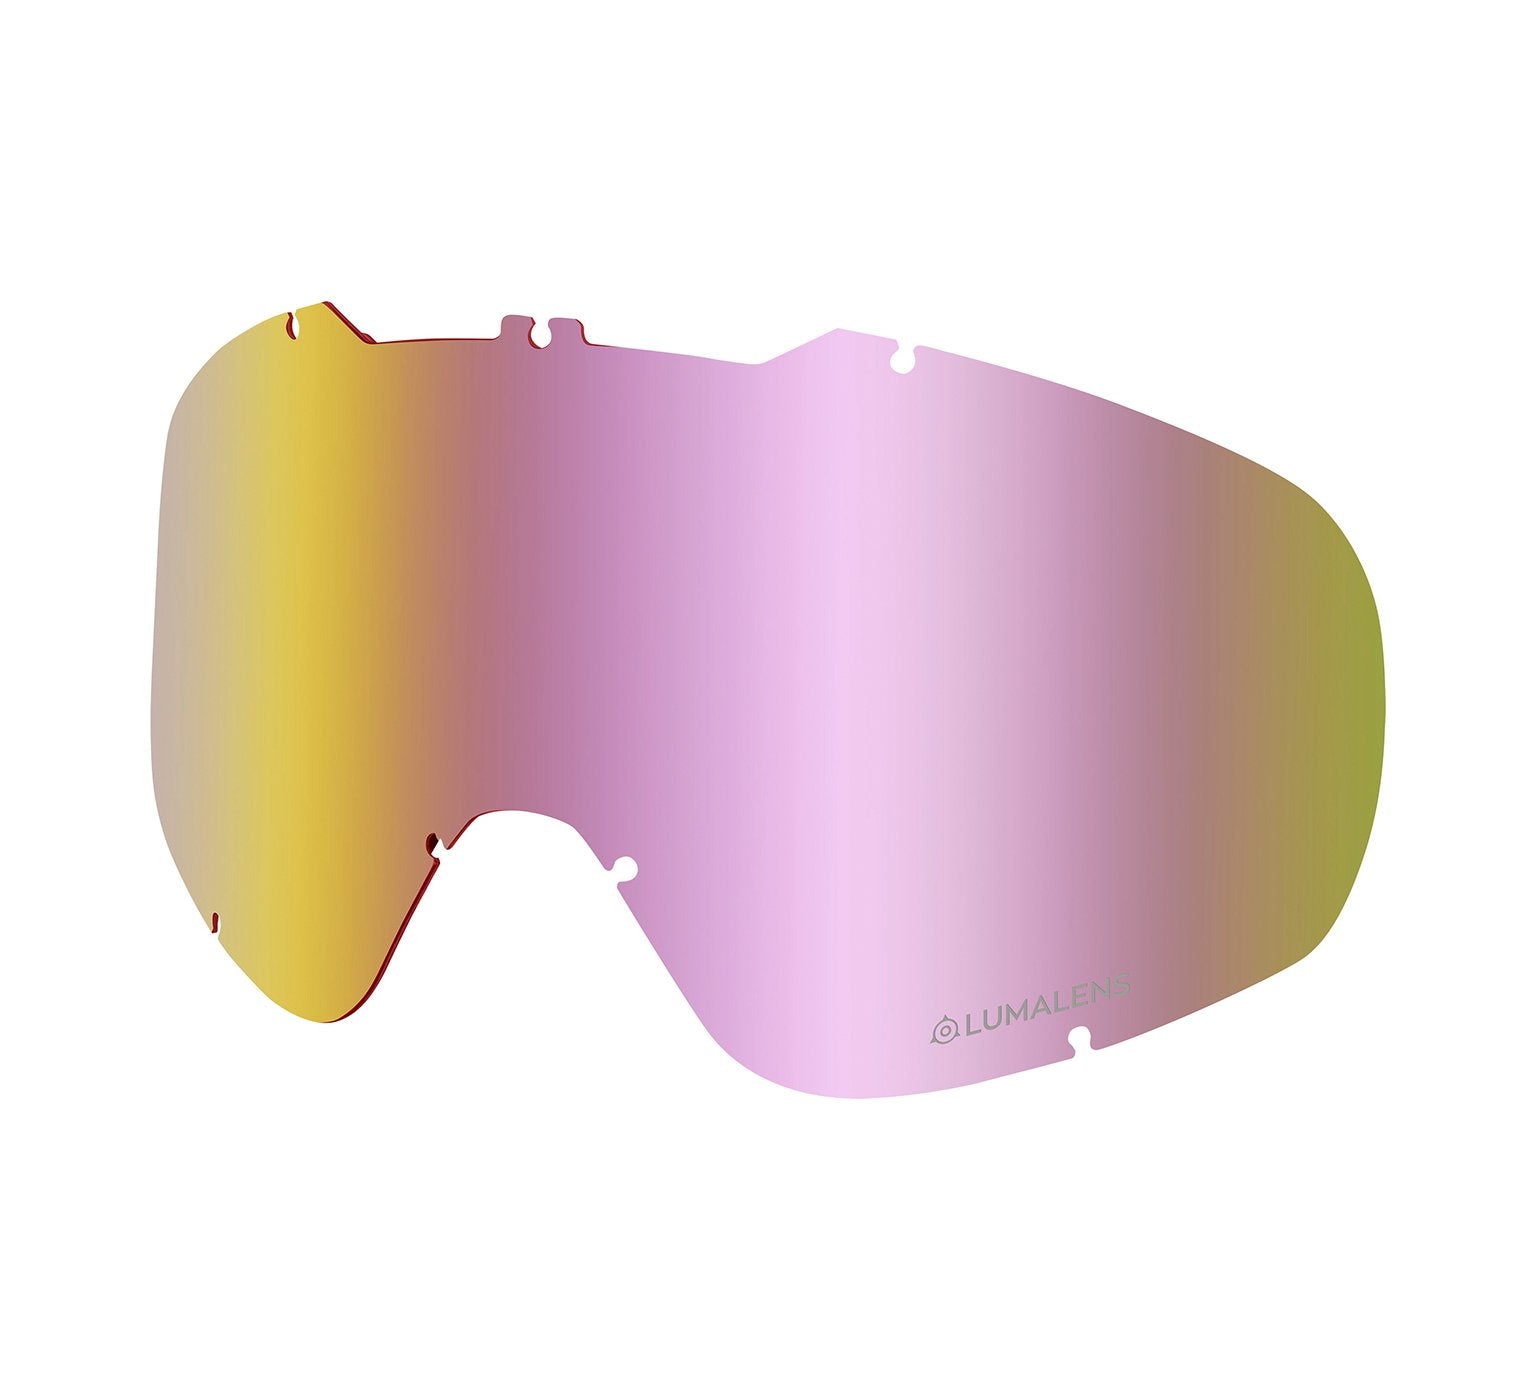 DX2 Replacement Lens - Lumalens Pink Ionized